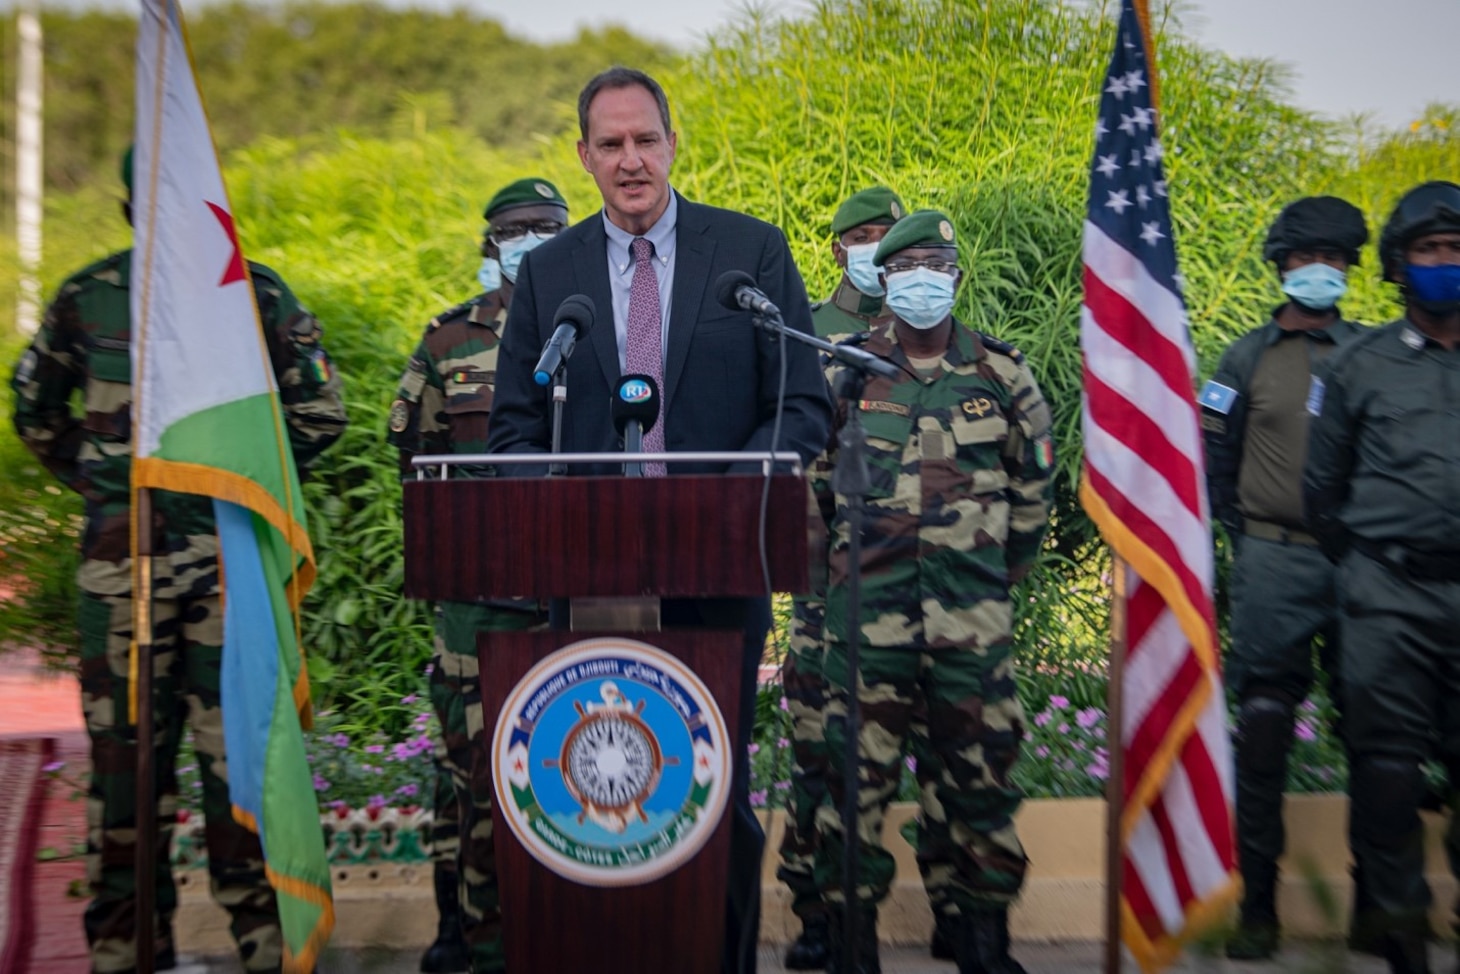 The Honorable Mr. Jonathan Pratt, U.S. Ambassador to Djibouti, provides remarks during the opening ceremony for exercise Cutlass Express 2022 at Doraleh Coast Guard Training Center, Djibouti, Feb. 6, 2022. Cutlass Express, sponsored by U.S. Africa Command and conducted by U.S. Naval Forces Africa, is designed to improve regional cooperation among participating nations in order to increase maritime safety and security in the East African coastal regions.